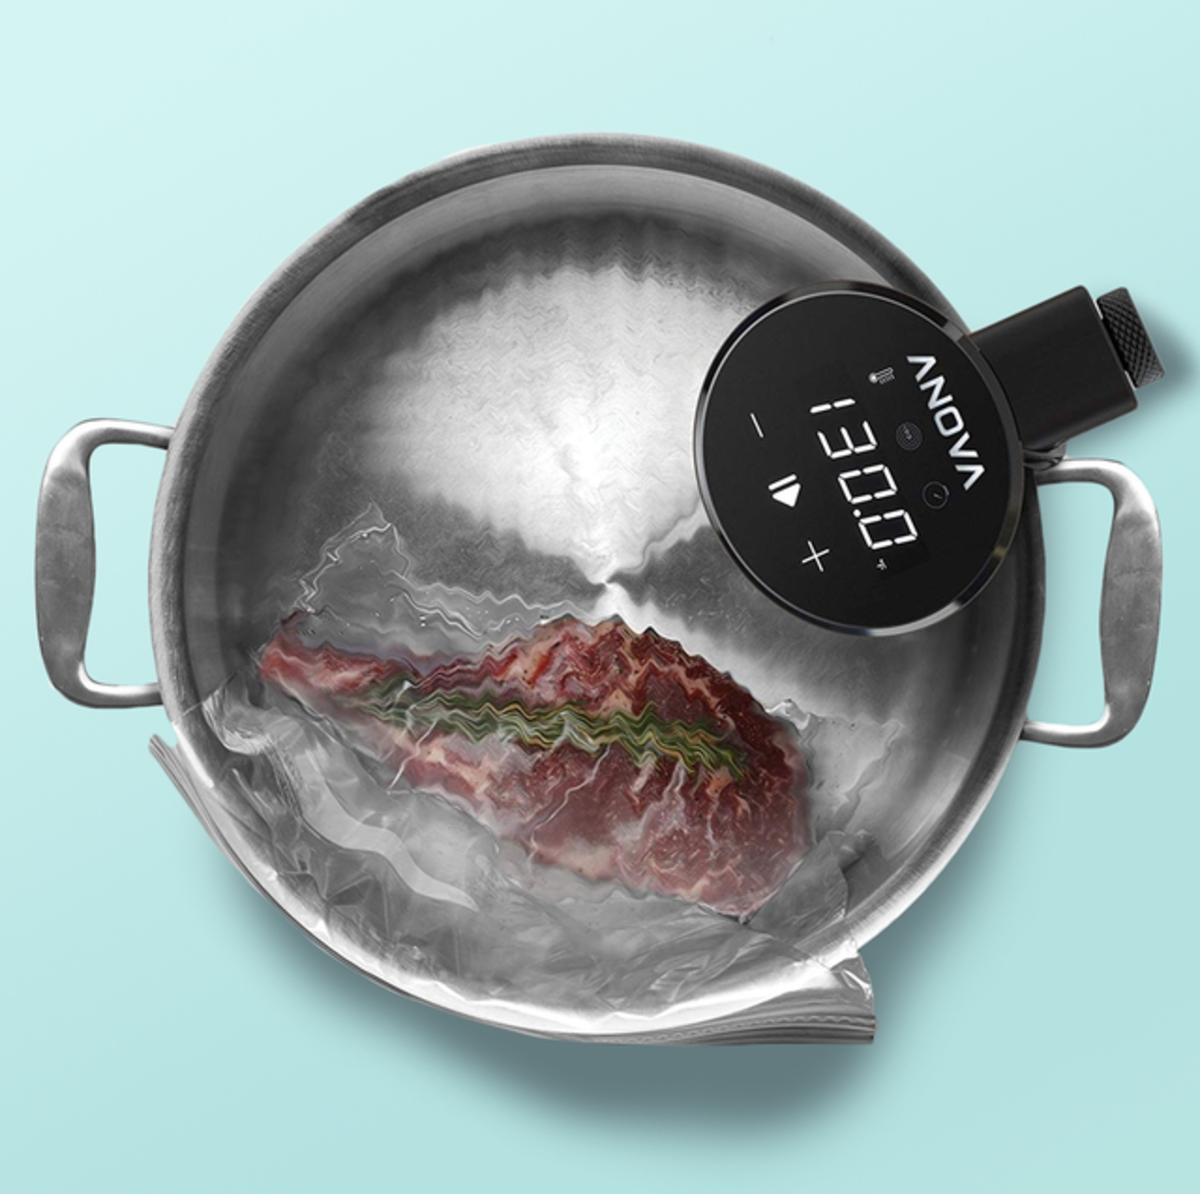 top-5-mistakes-all-new-sous-vide-users-make